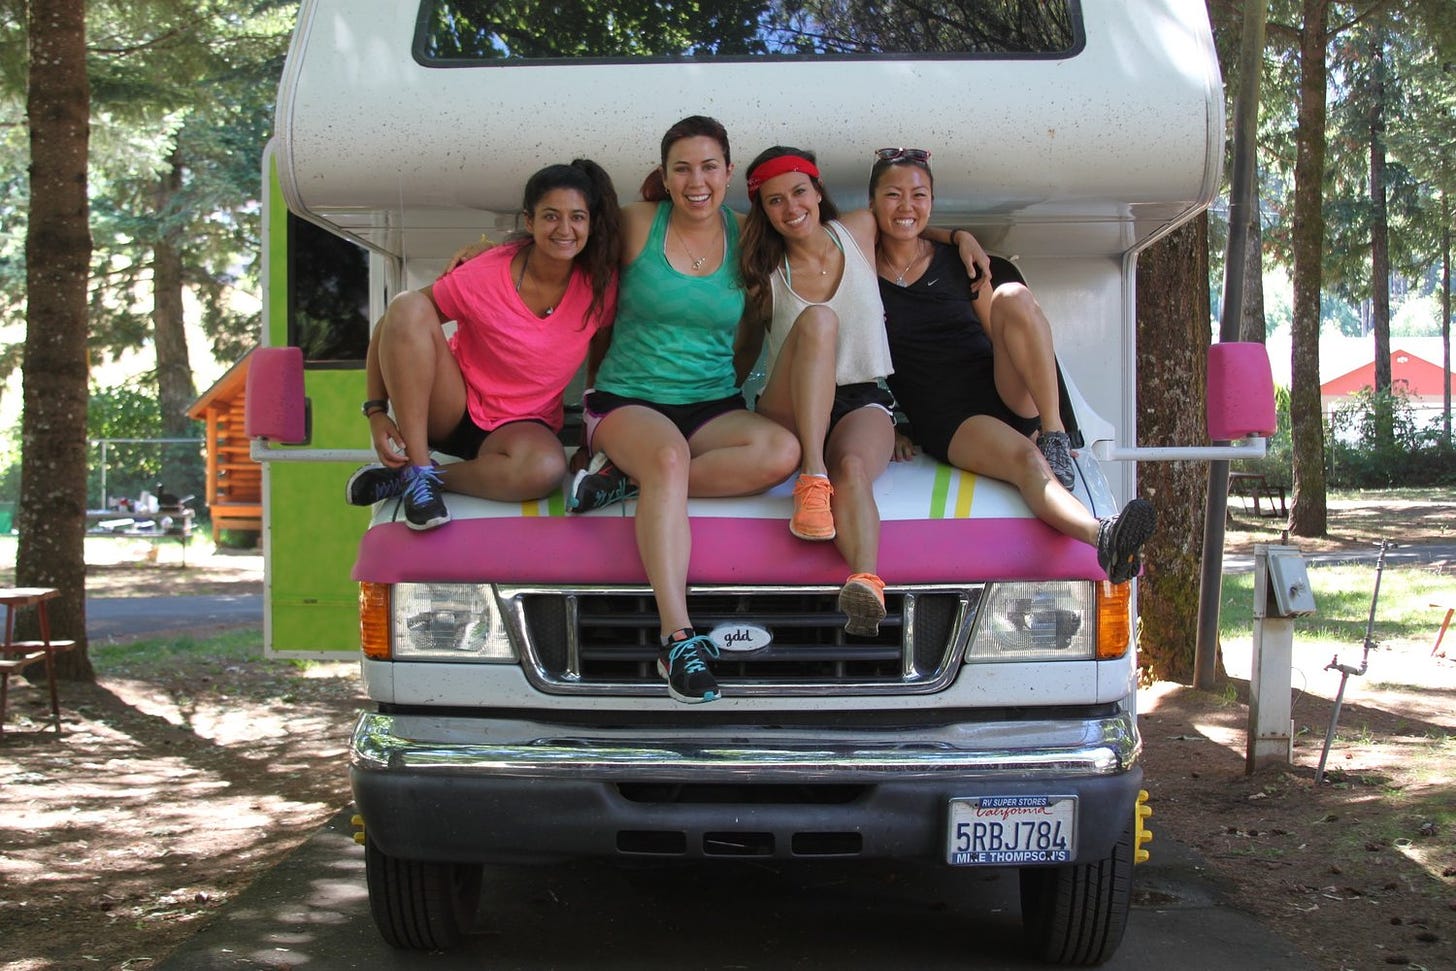 Katie is sitting on top of a large white and pink RV with three of her friends. They are all dressed in sports gear, smiling into the camera with their arms around each other. The RV is parked in between tall trees. The sun is shining.